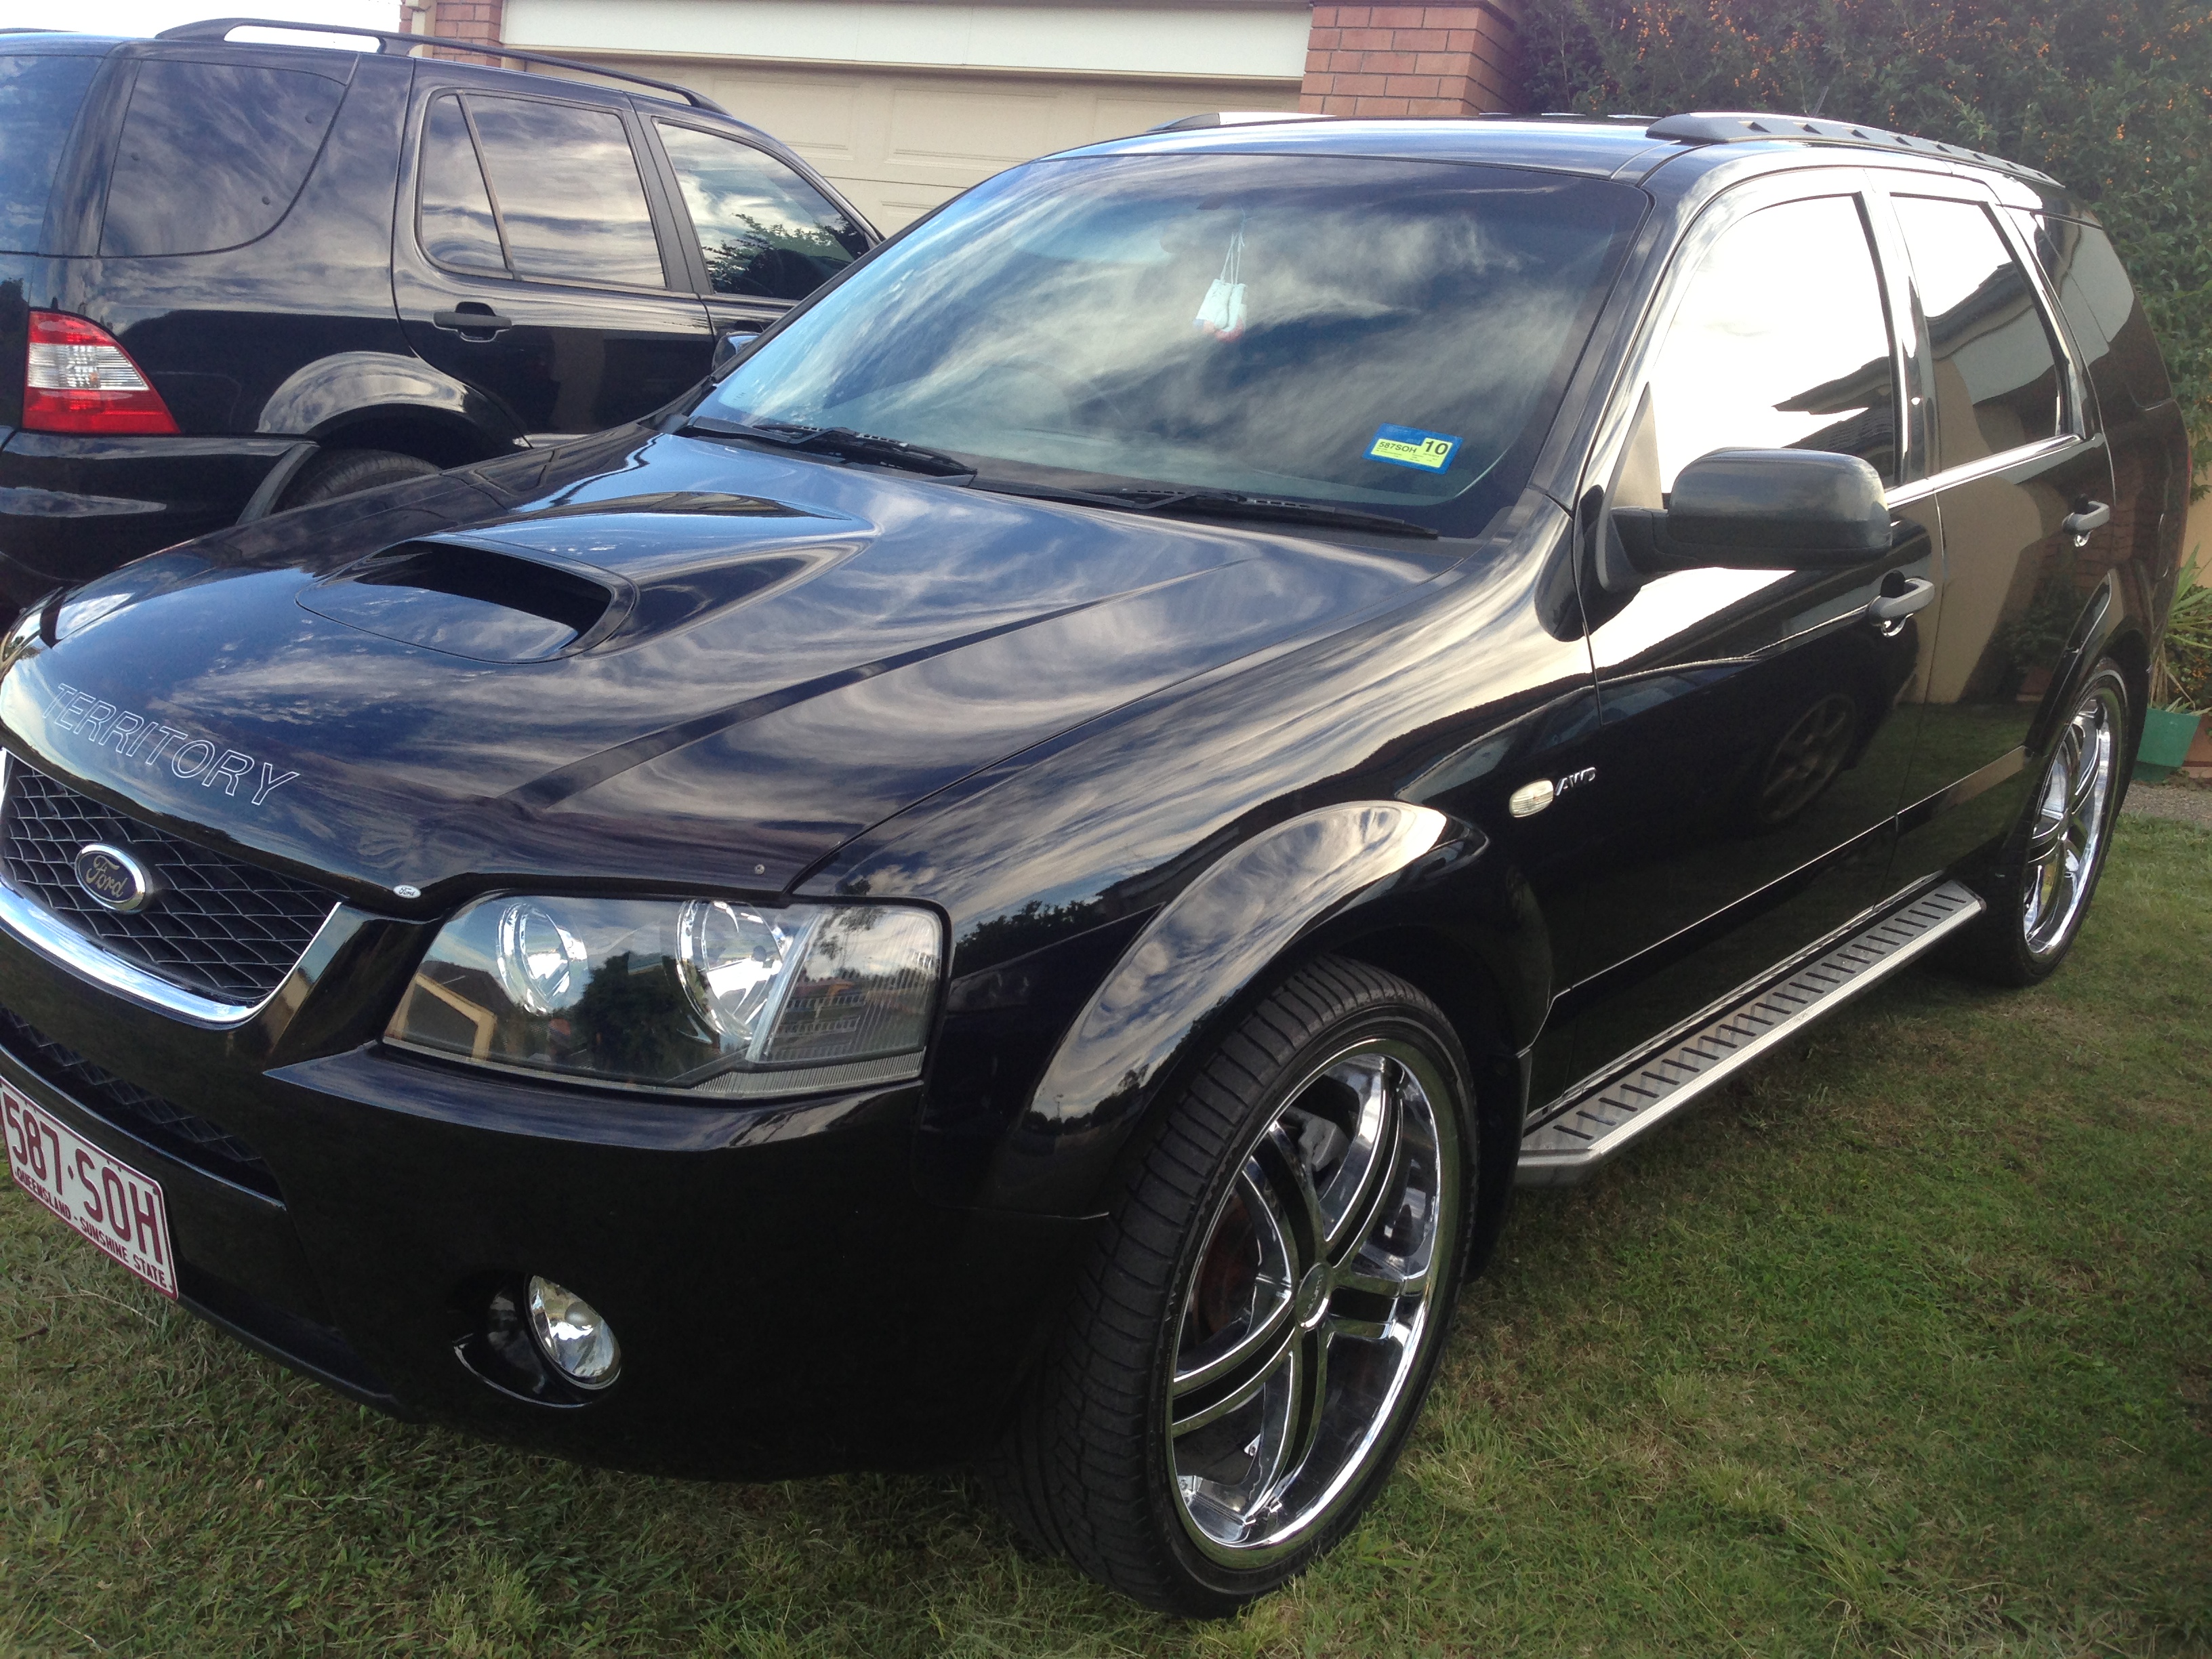 Ford territory turbo for sale qld #4